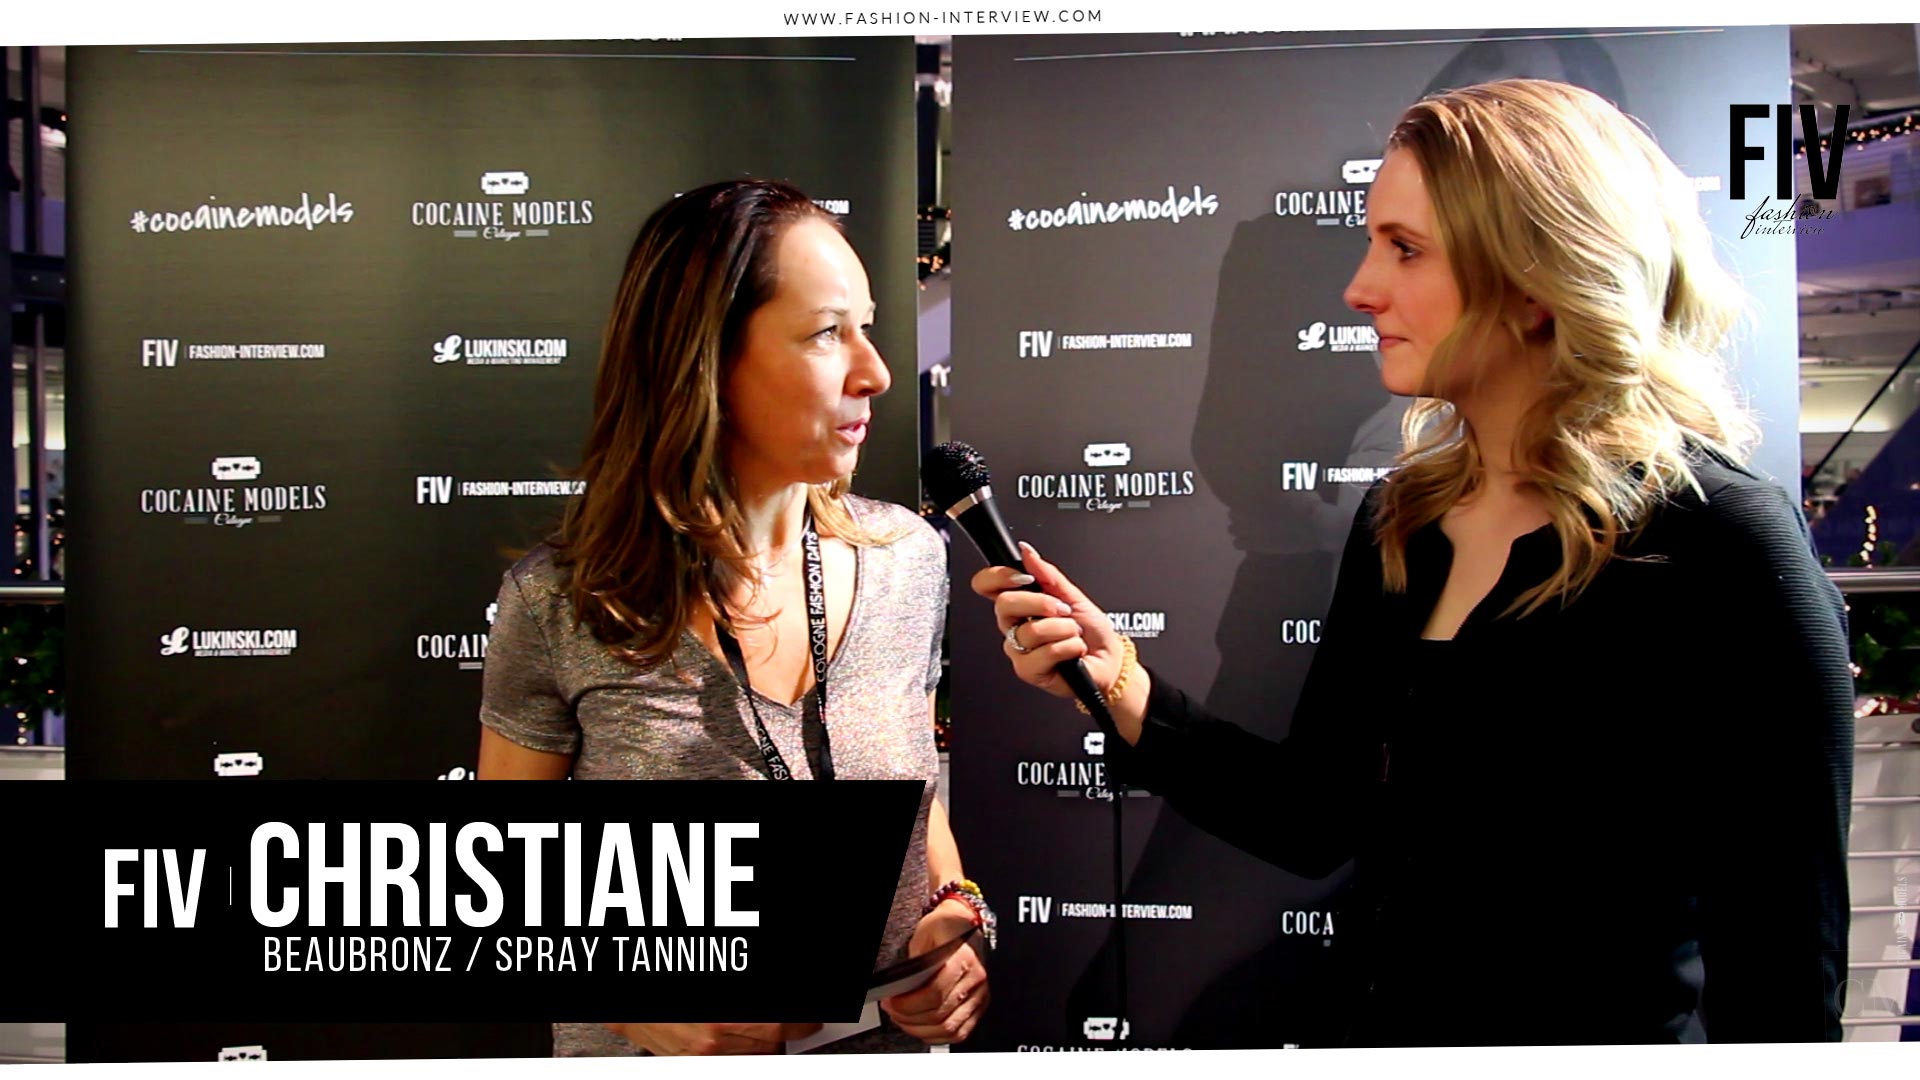 christiane-beaubronz-spray-tanning-beauty-cologne-fashion-days-interview